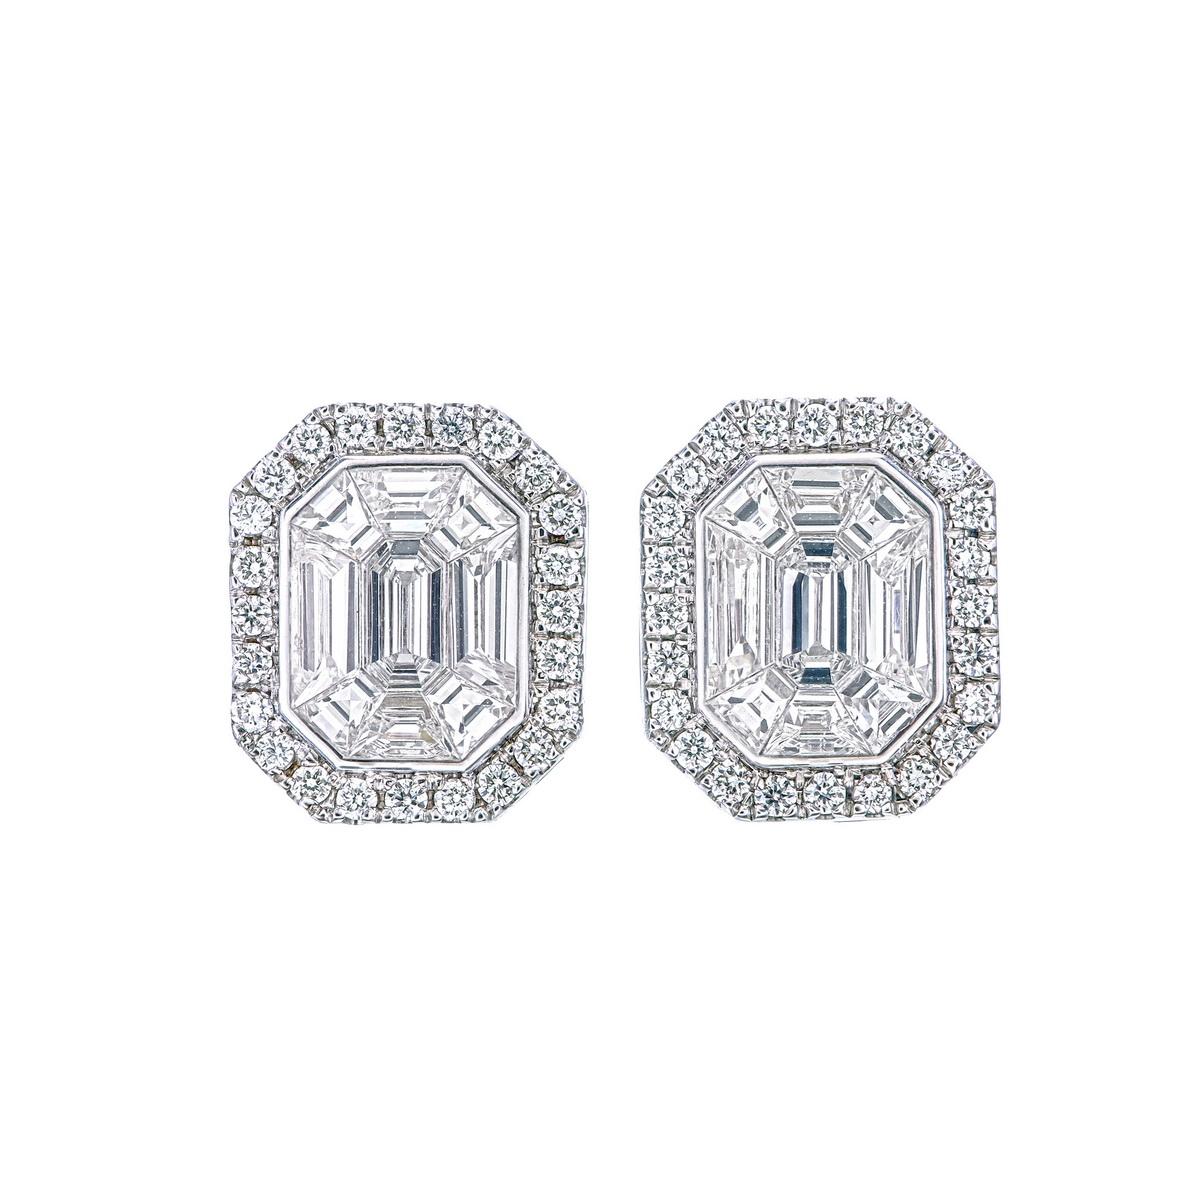 This pair of earrings is made with 1.35 carat diamonds in composite setting giving a look of 6 carat pair.
The earrings can be work with /without the Jackets.
6 carat pair is worth over 50000$ and this pair is at 10% price due its special diamond